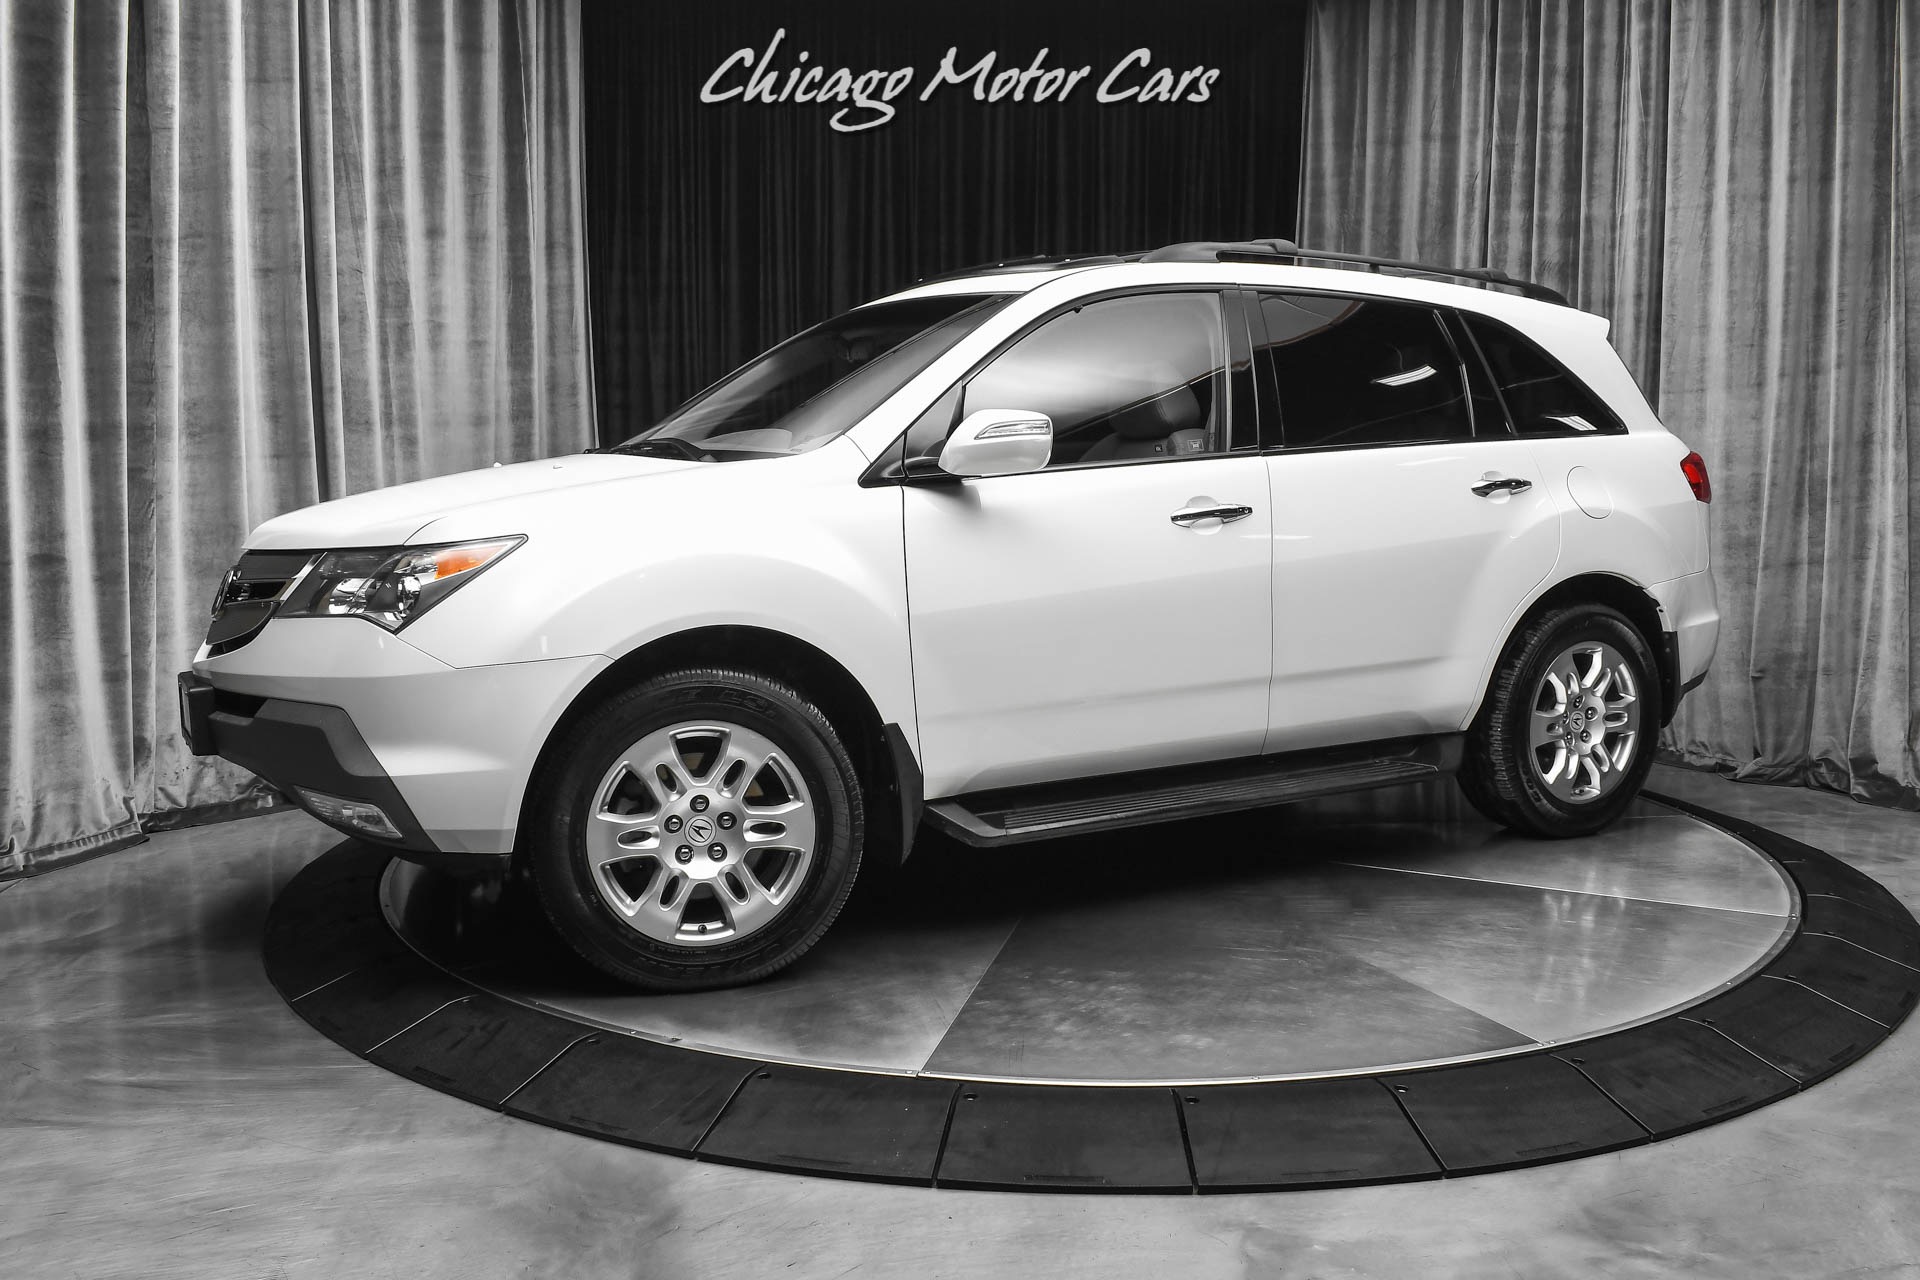 Used 2008 Acura MDX SH-AWD w/Power Tailgate w/Tech For Sale ($10,800) |  Chicago Motor Cars Stock #H548533